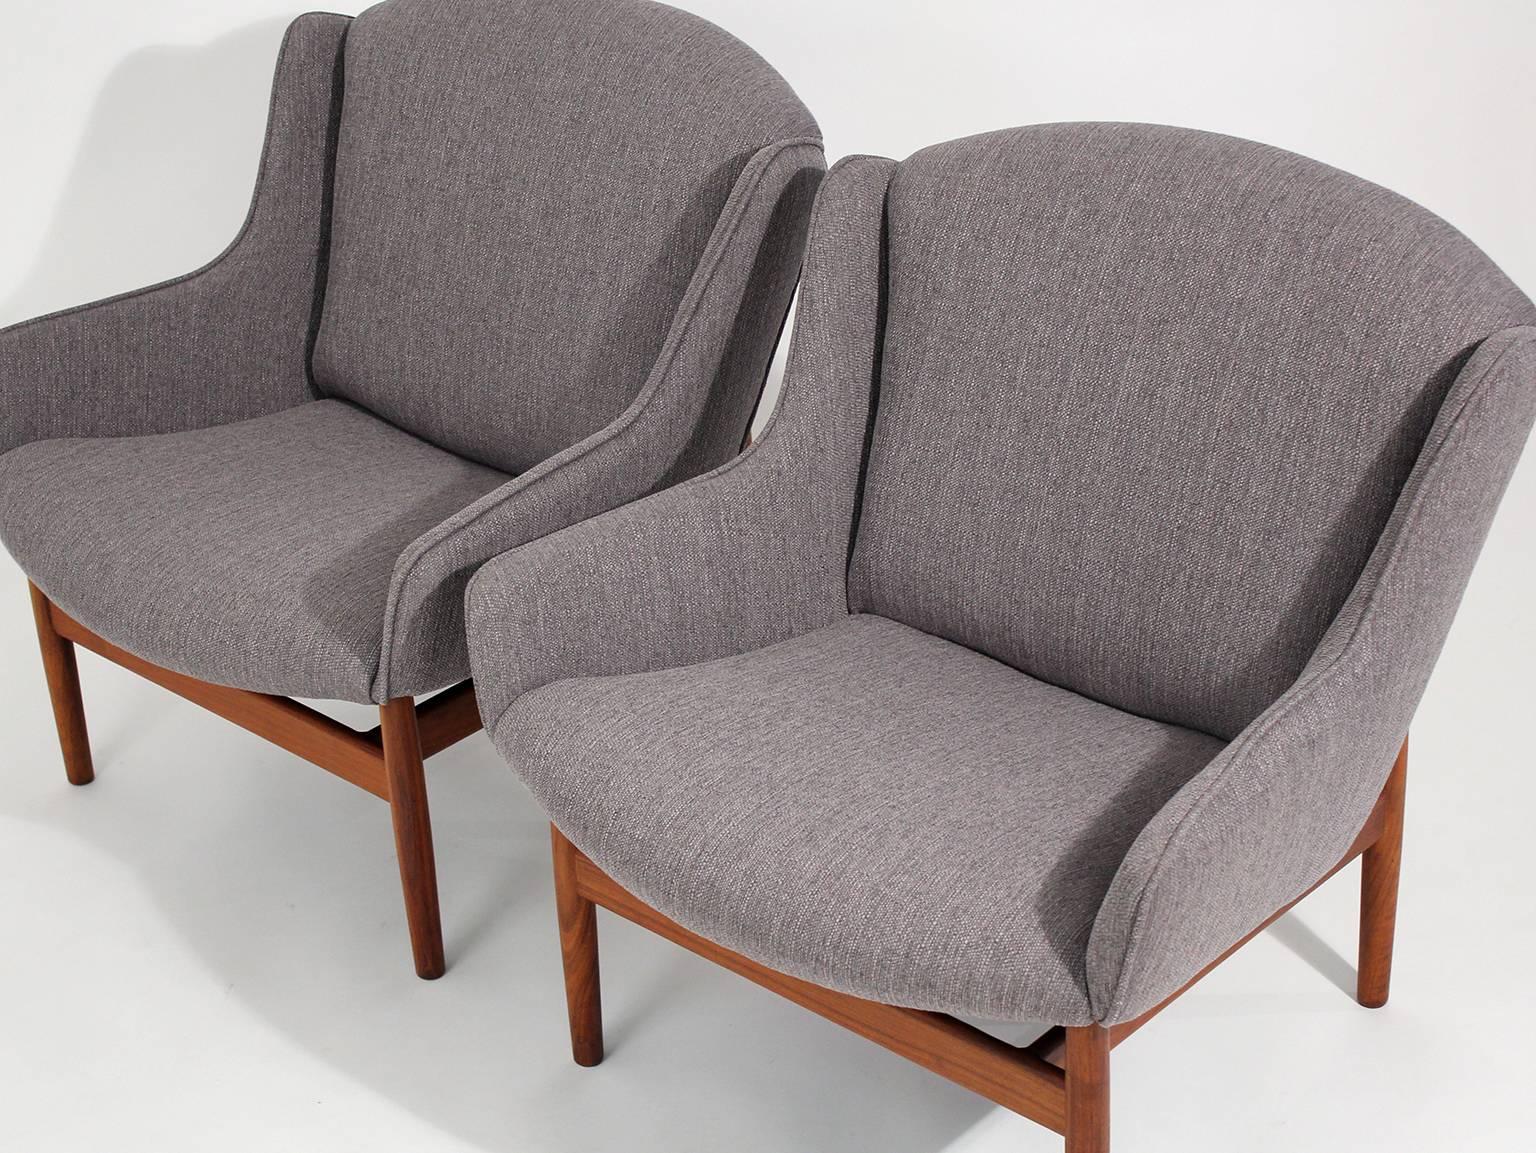 Jens Risom Pair of Lounge Chairs for Jens Risom Design, Inc. 1